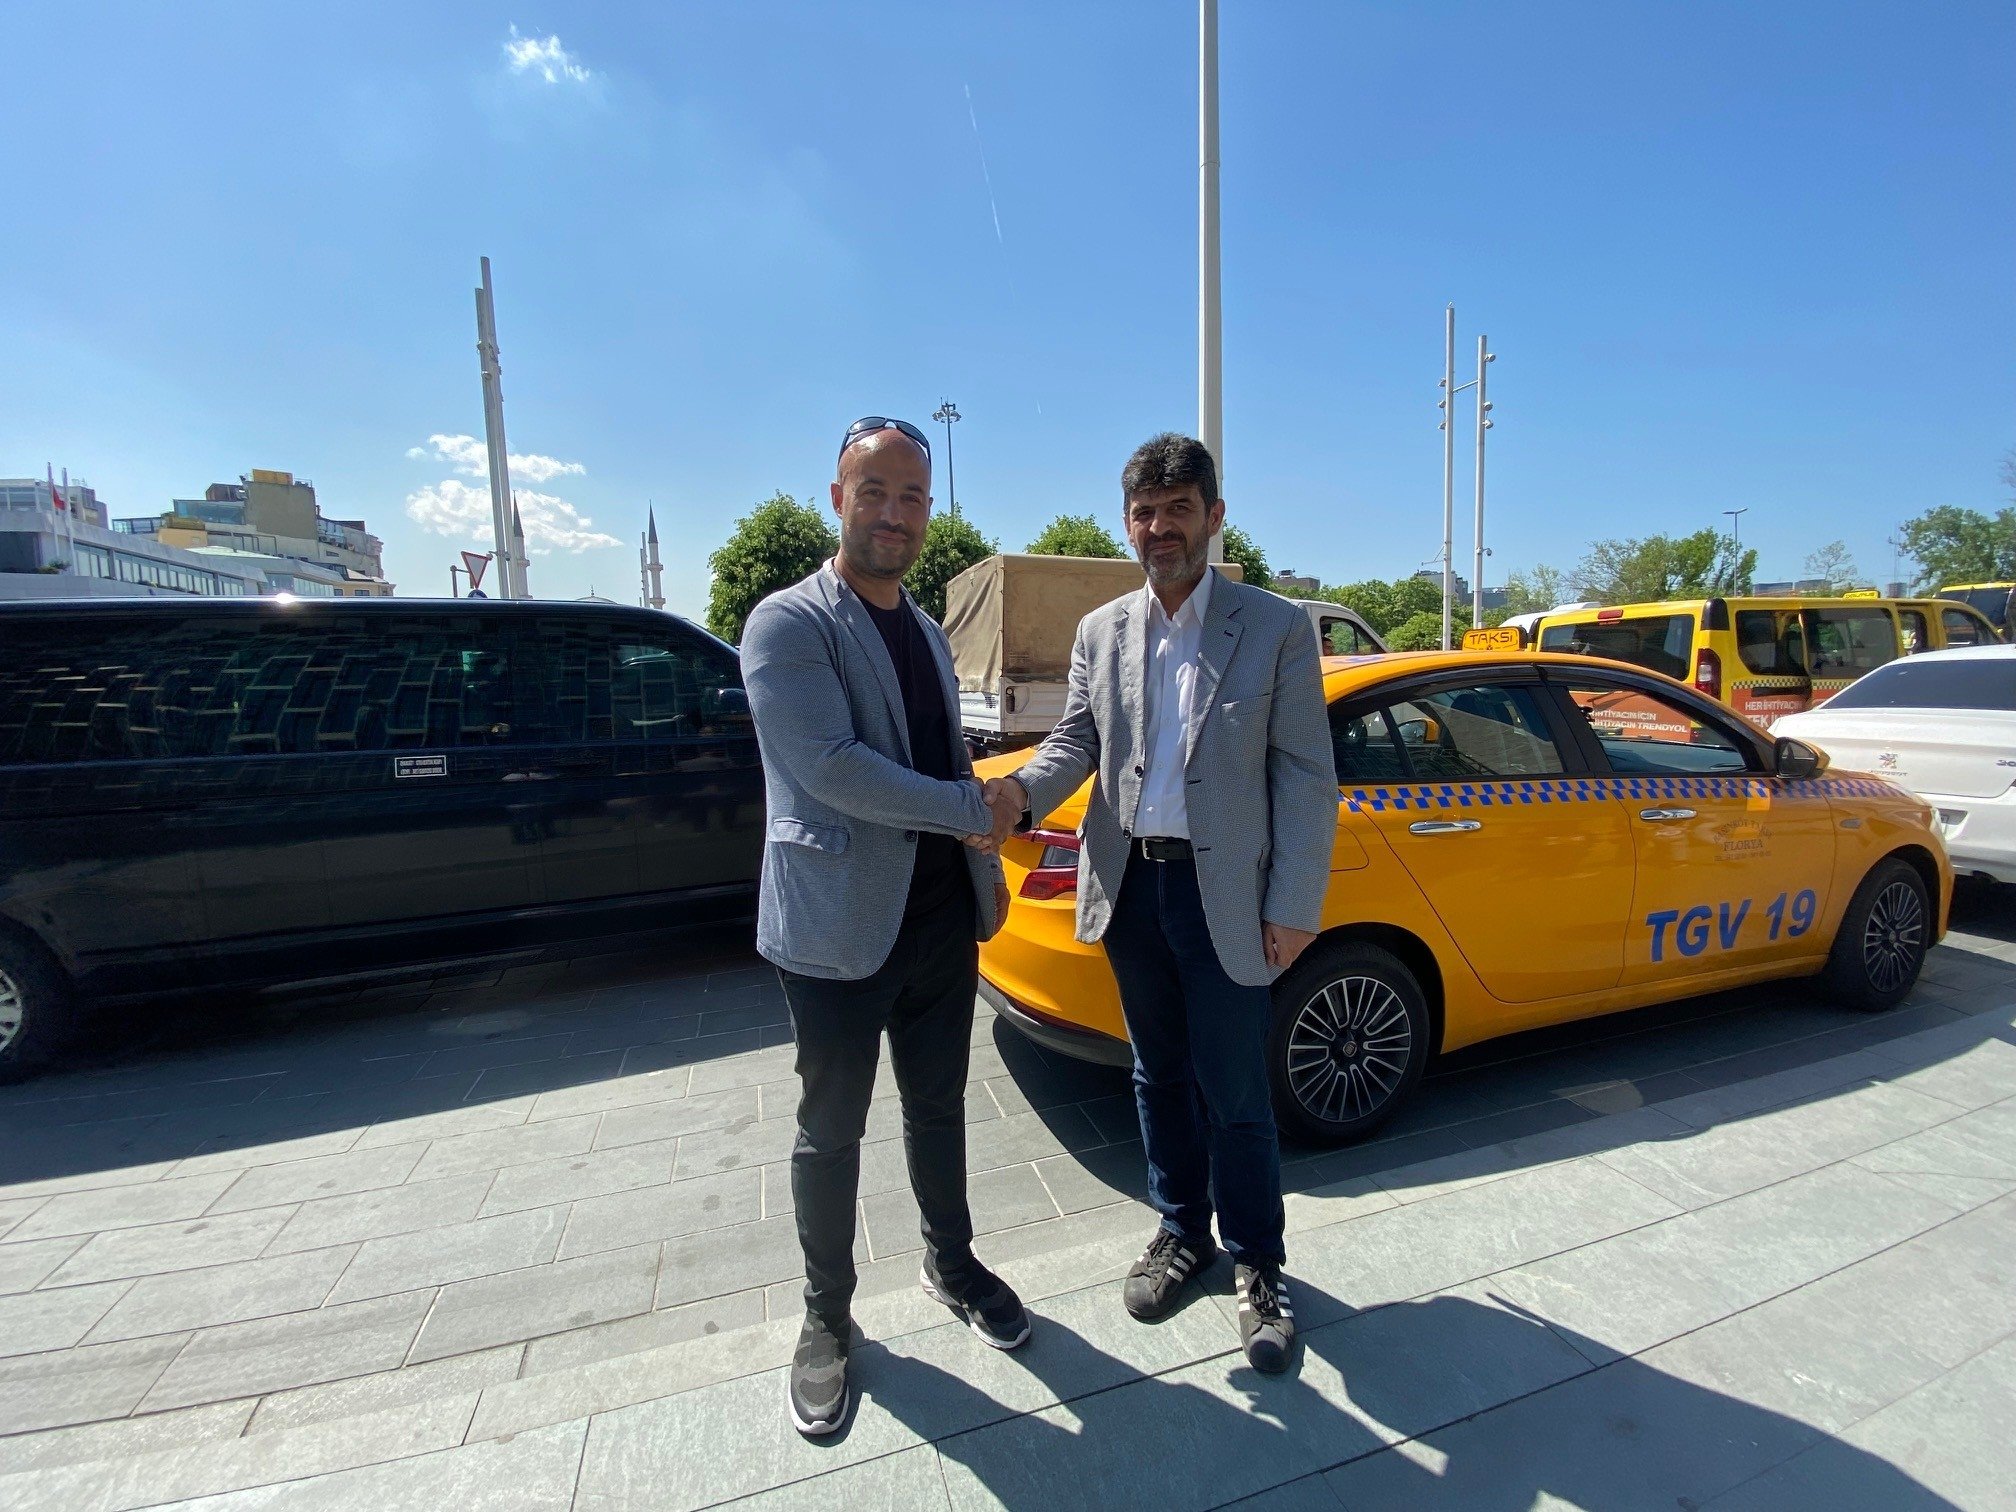 Istanbul taxi driver awarded for accepting customer